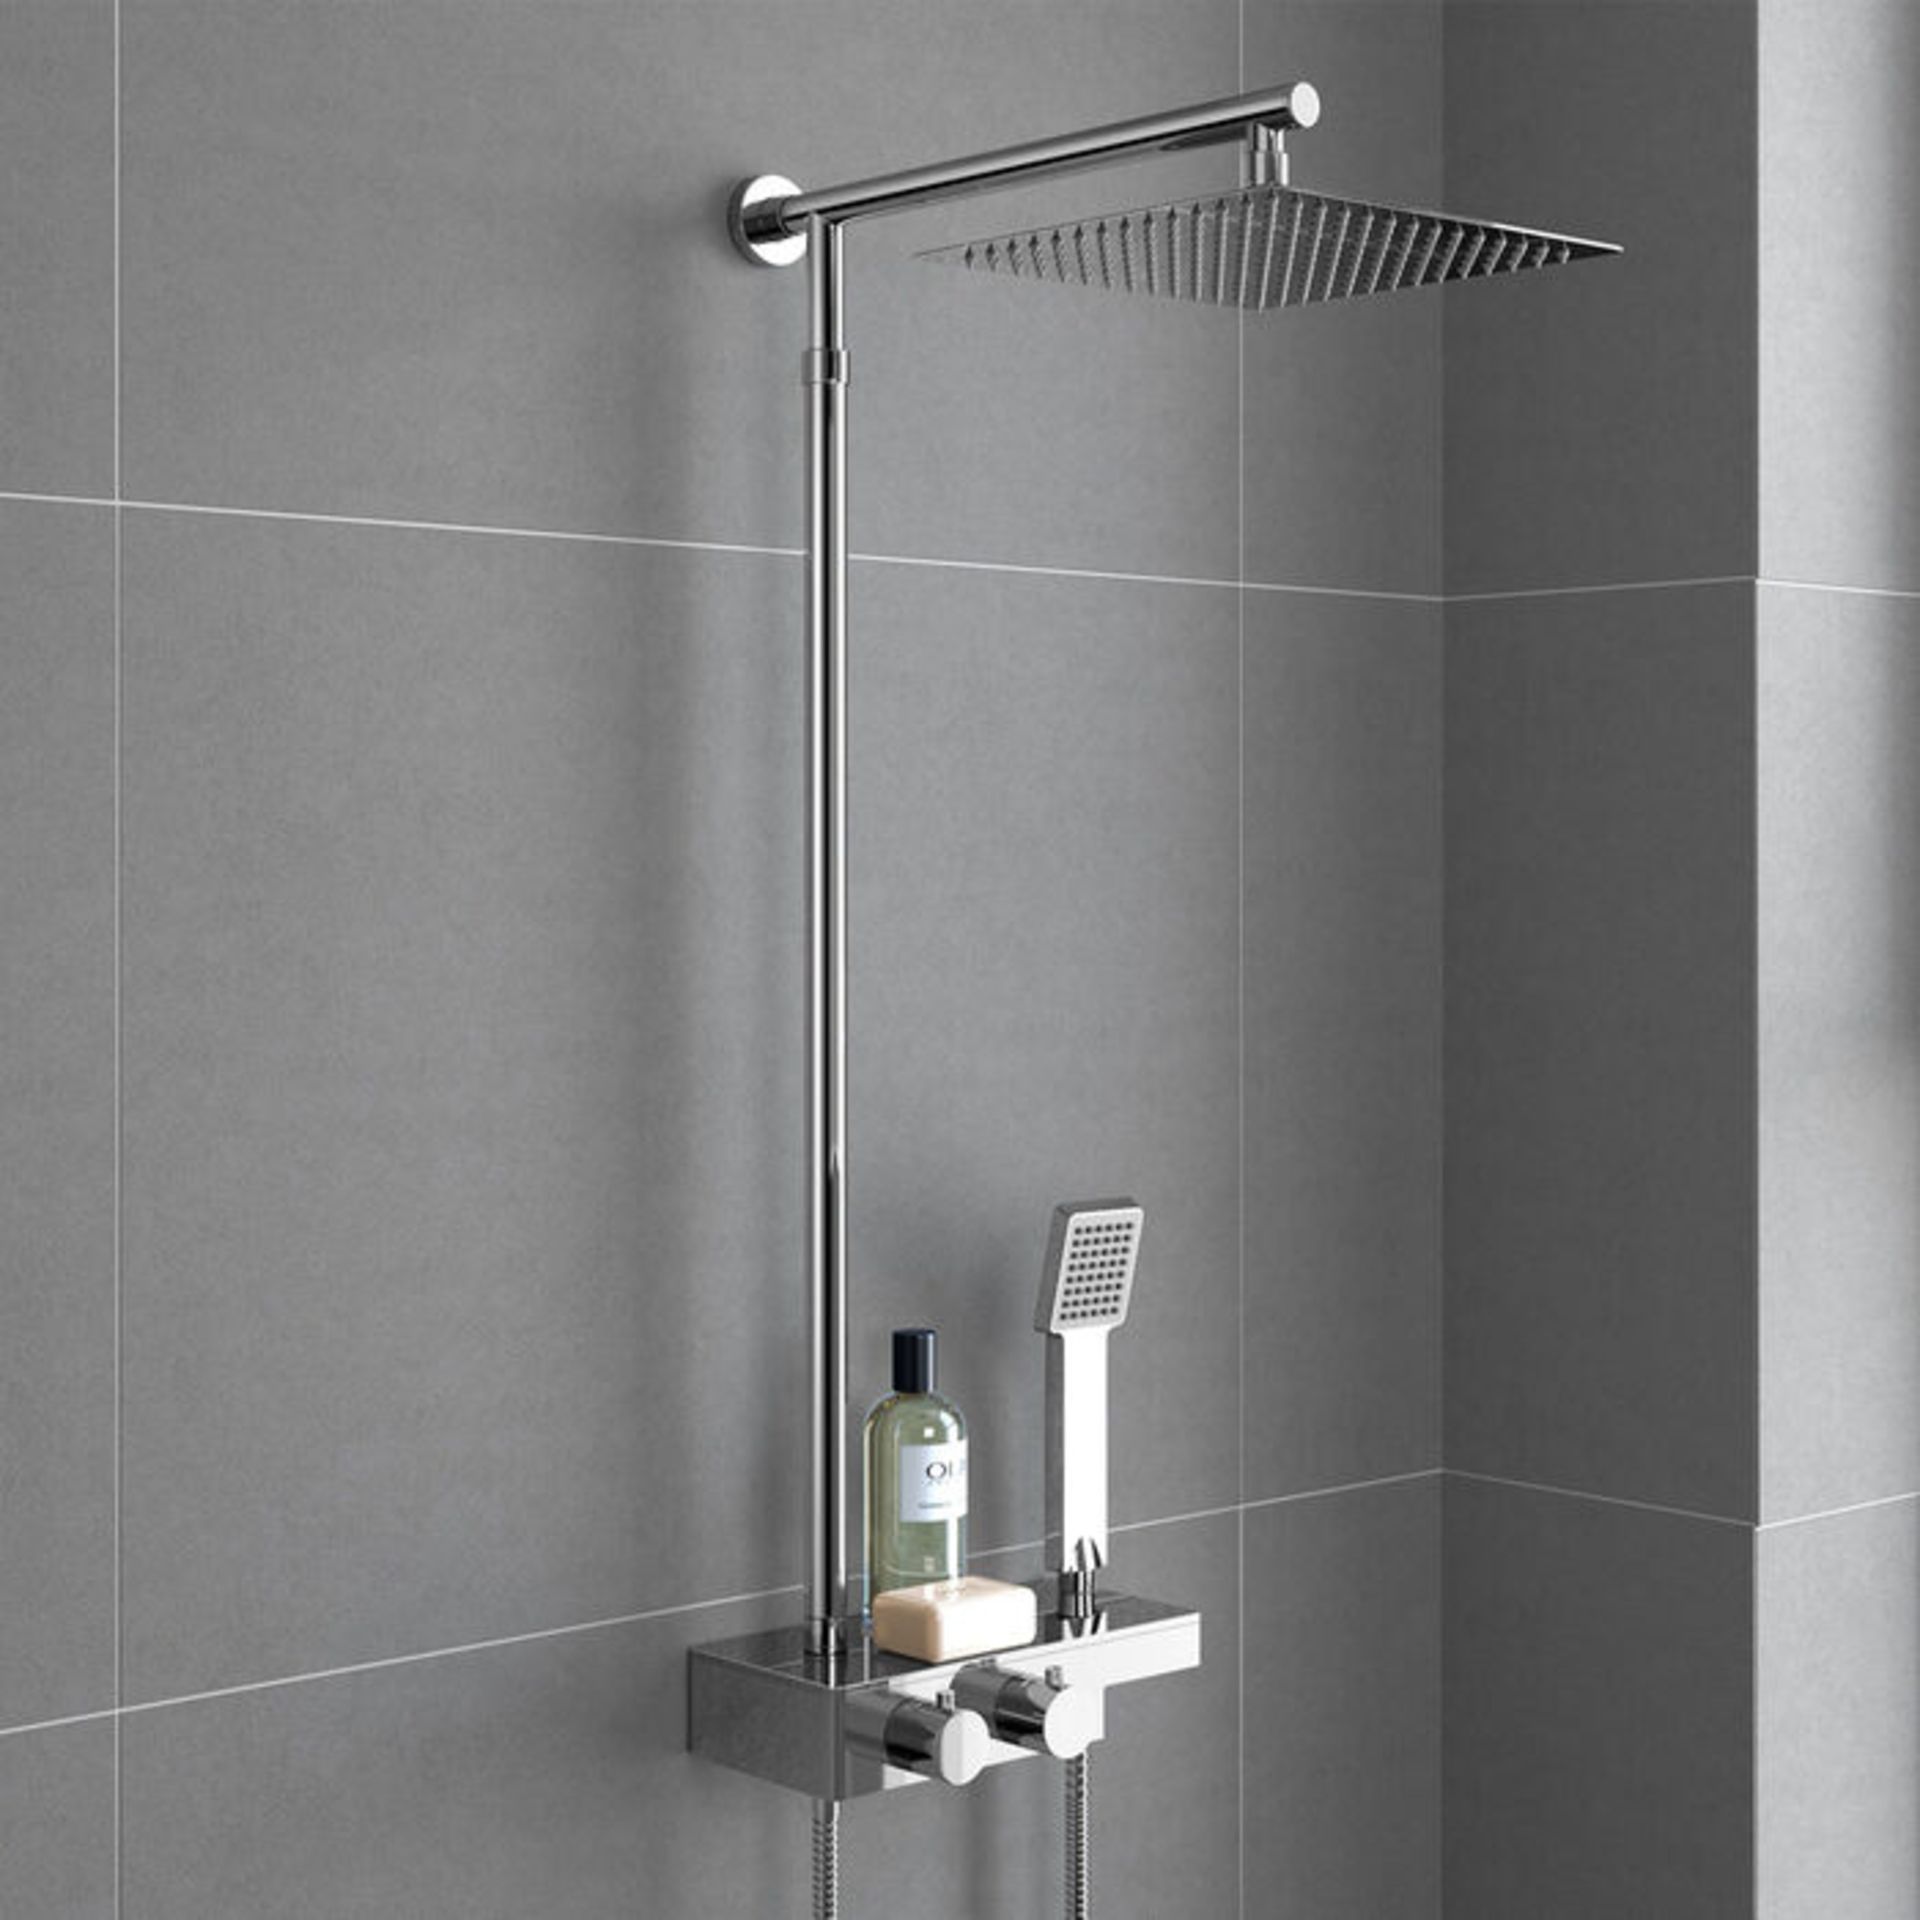 (AA121) Square Exposed Thermostatic Shower Shelf, Kit & Large Head. RRP £349.99. Style meets f... - Image 3 of 3